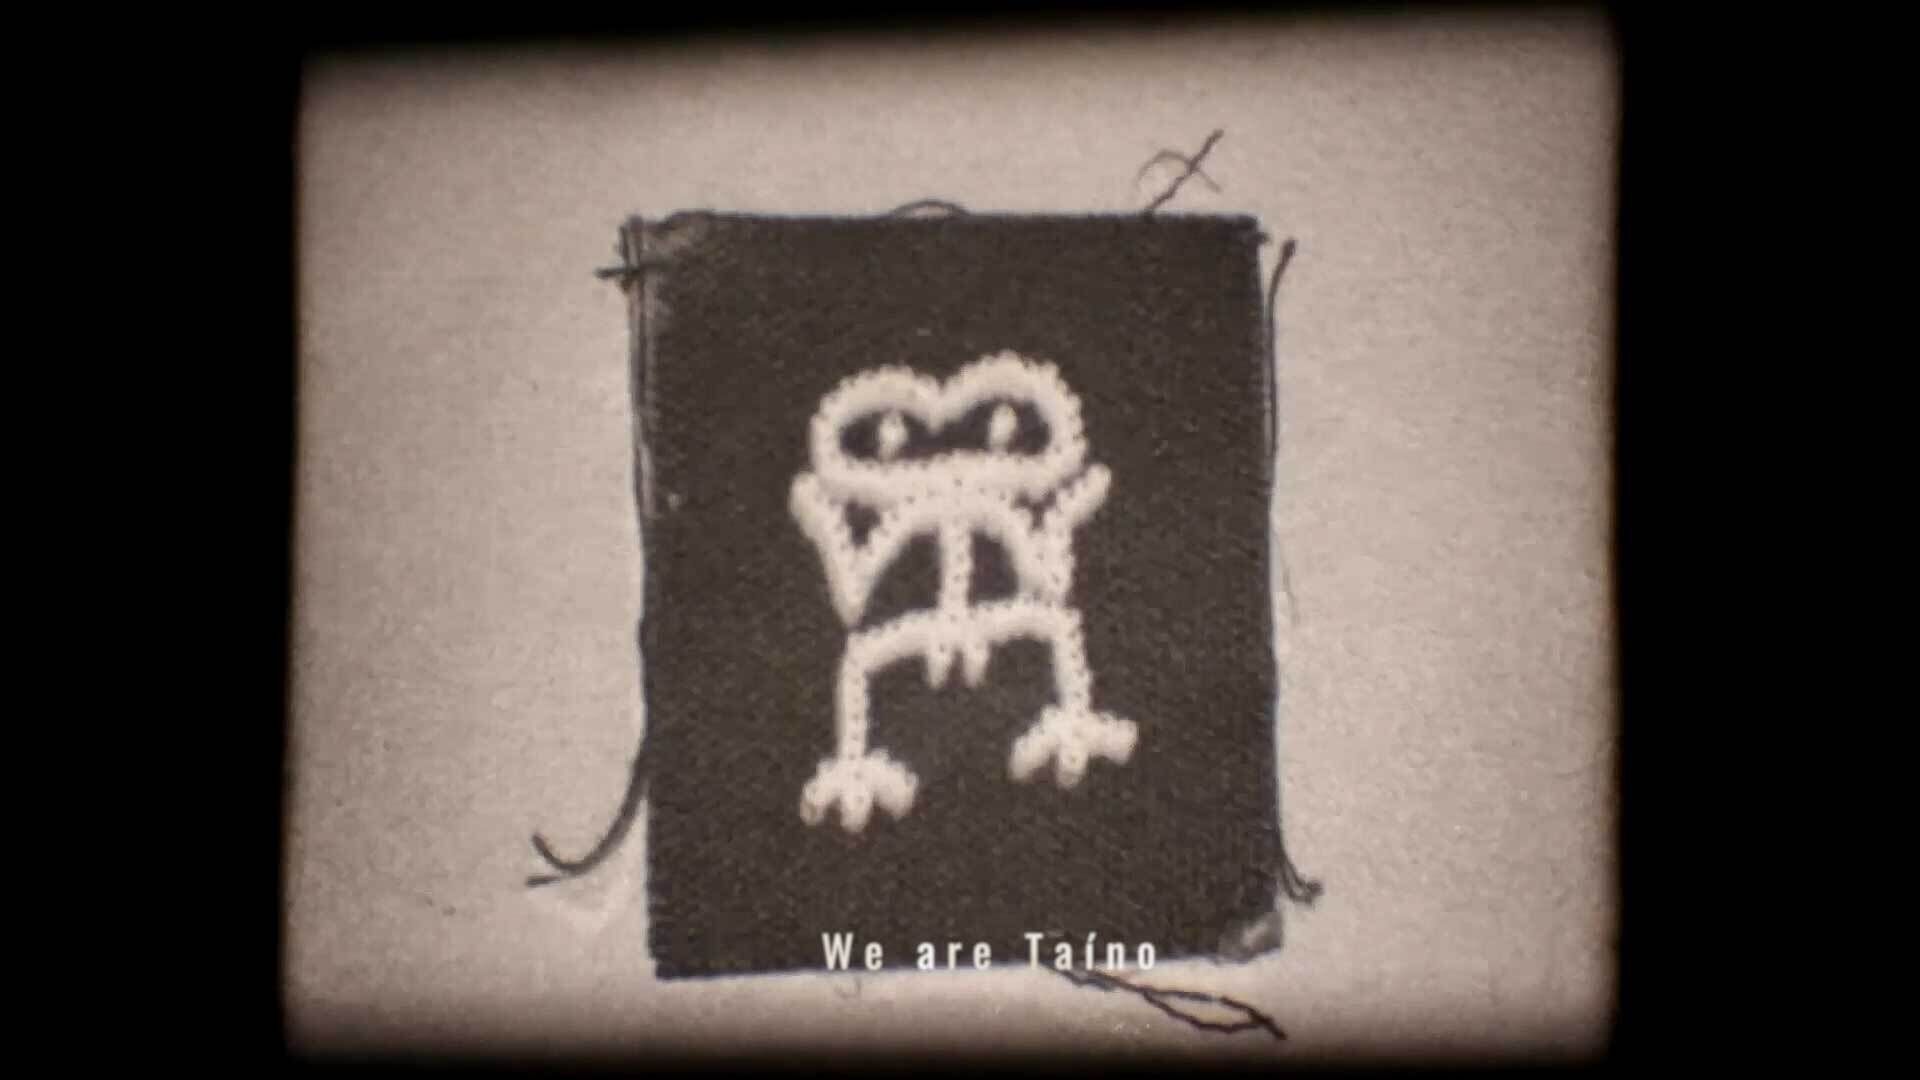 A stitched figure on fabric with the caption "We are Taíno" displayed on a grainy background.